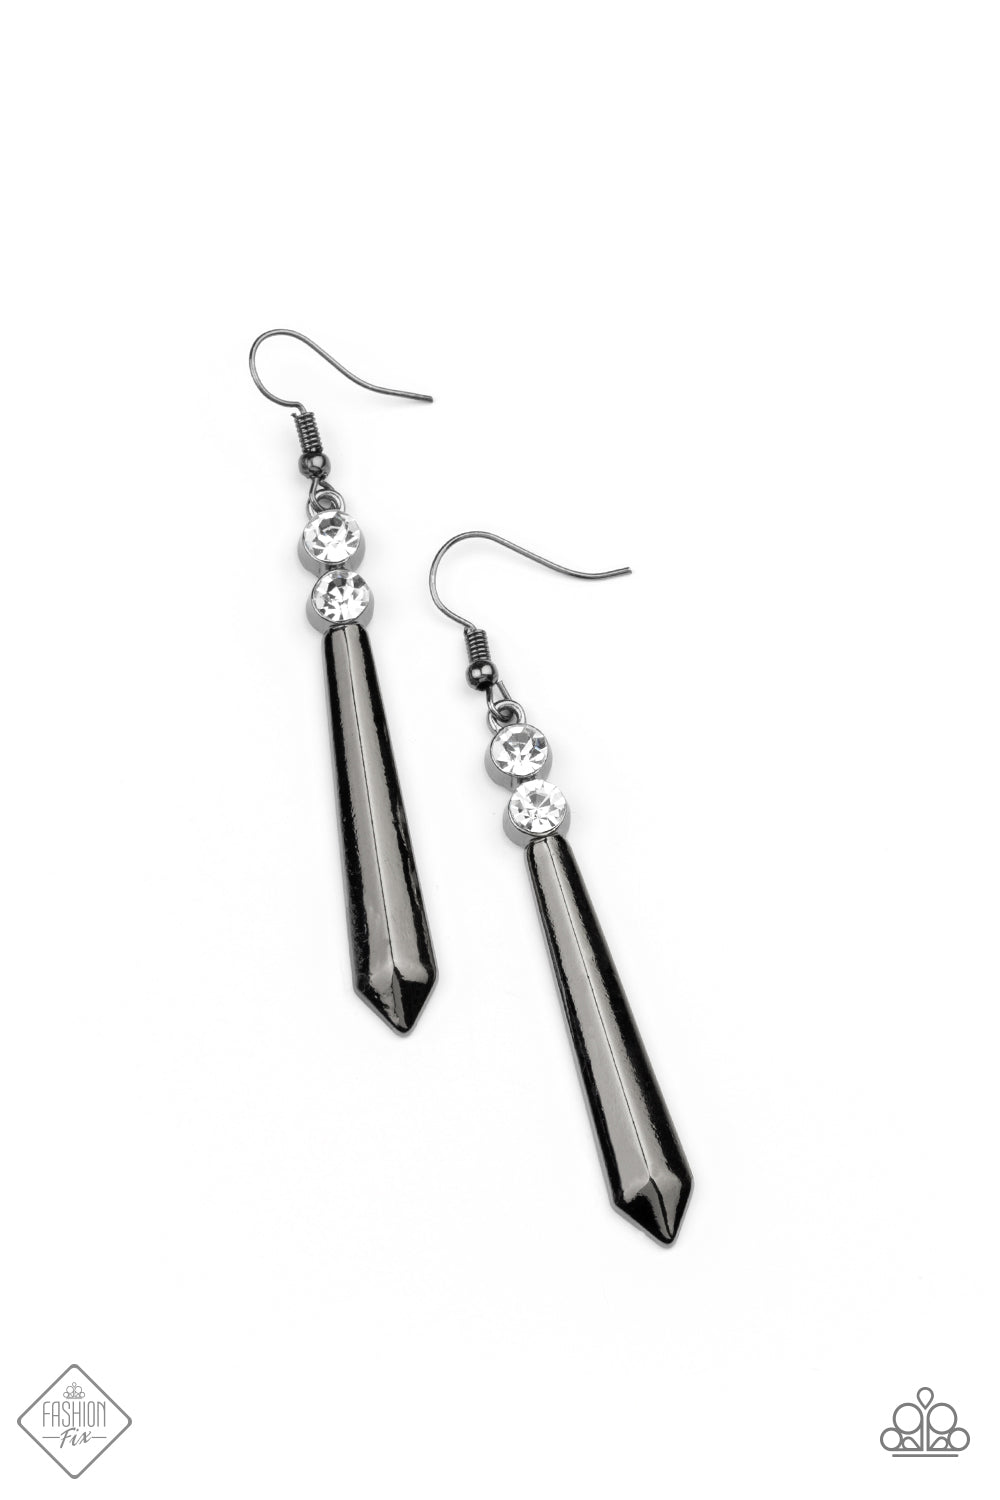 Sparkle Stream Black Earring - Paparazzi Accessories  A pair of glittery white rhinestones crowns a flared gunmetal rod, creating a sharp-looking lure. Earring attaches to a standard fishhook fitting.  All Paparazzi Accessories are lead free and nickel free!  Sold as one pair of earrings.